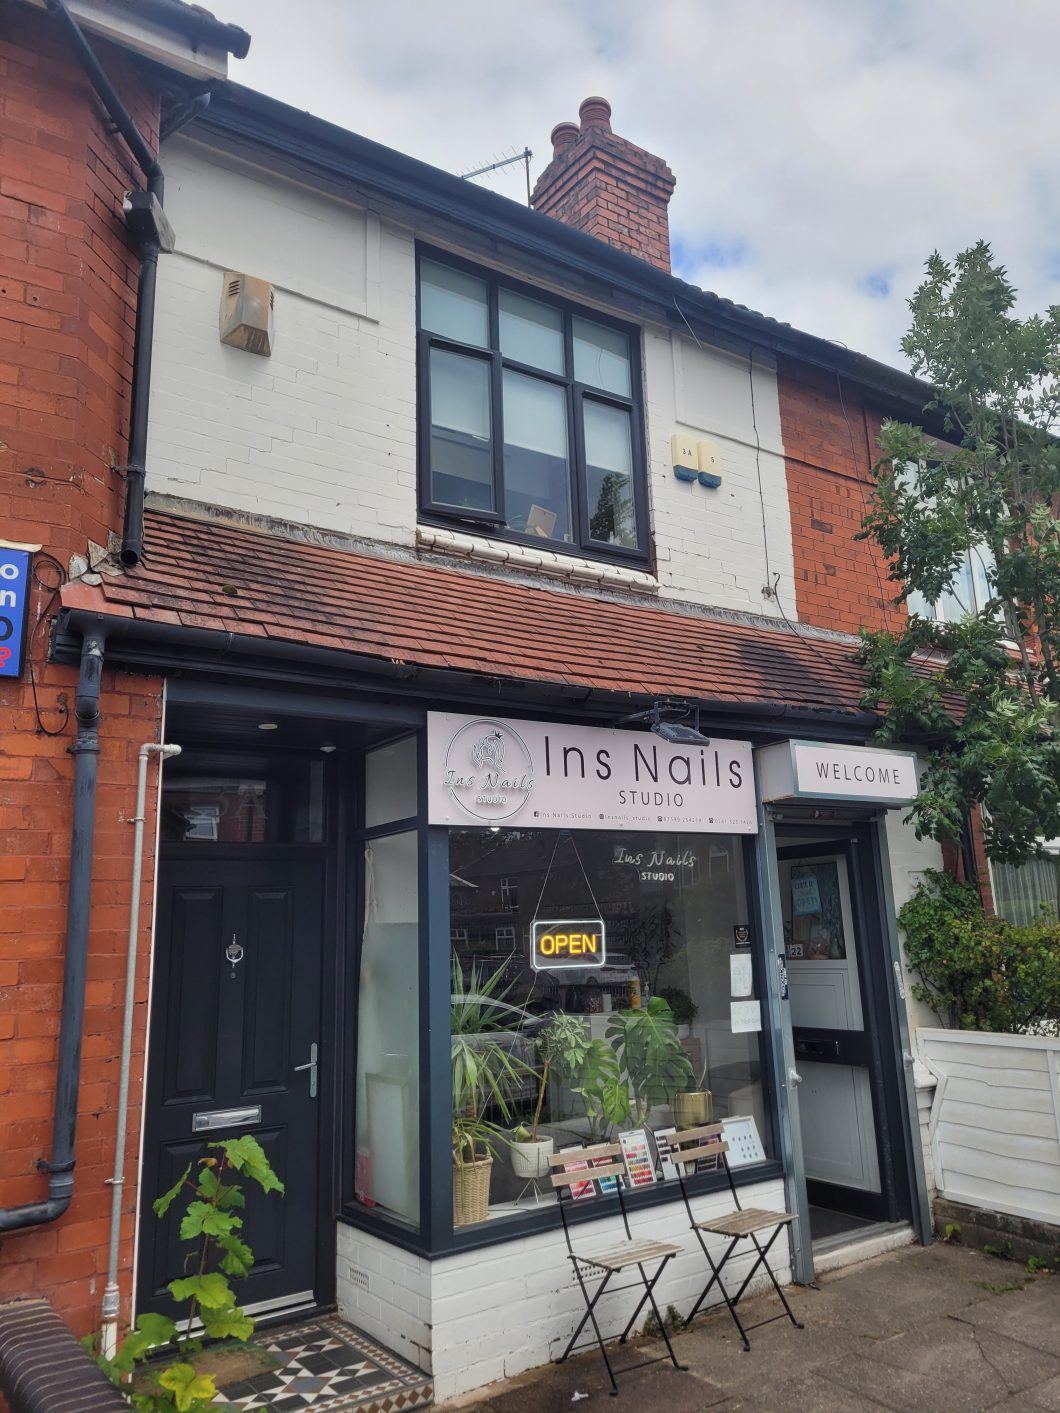 Didsbury Village Investment Property For Sale